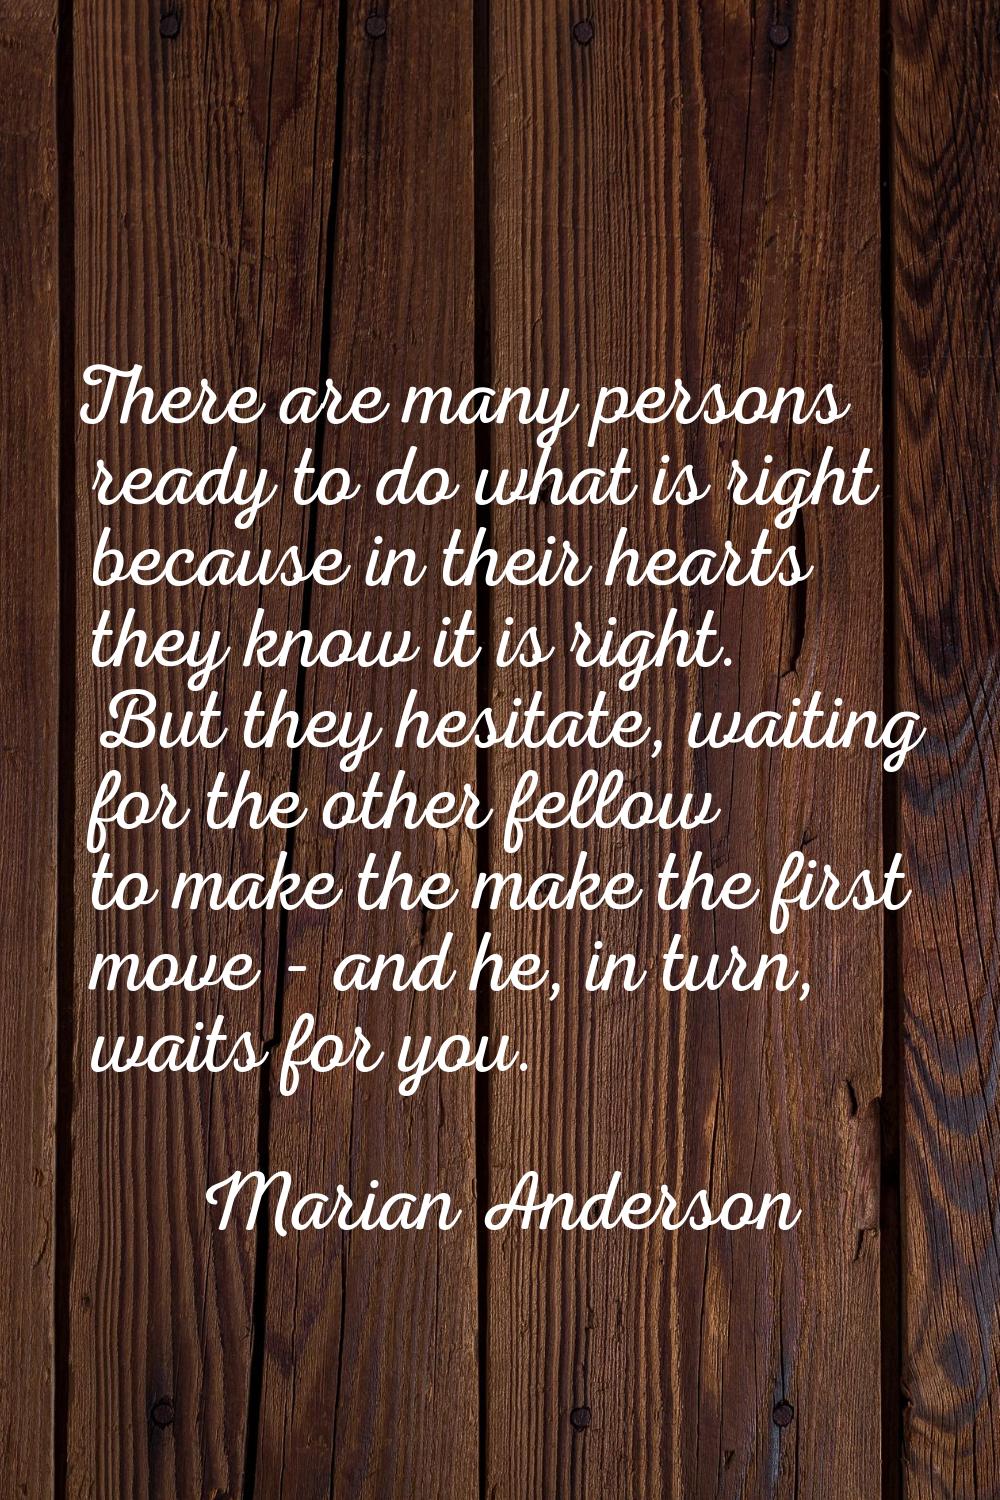 There are many persons ready to do what is right because in their hearts they know it is right. But